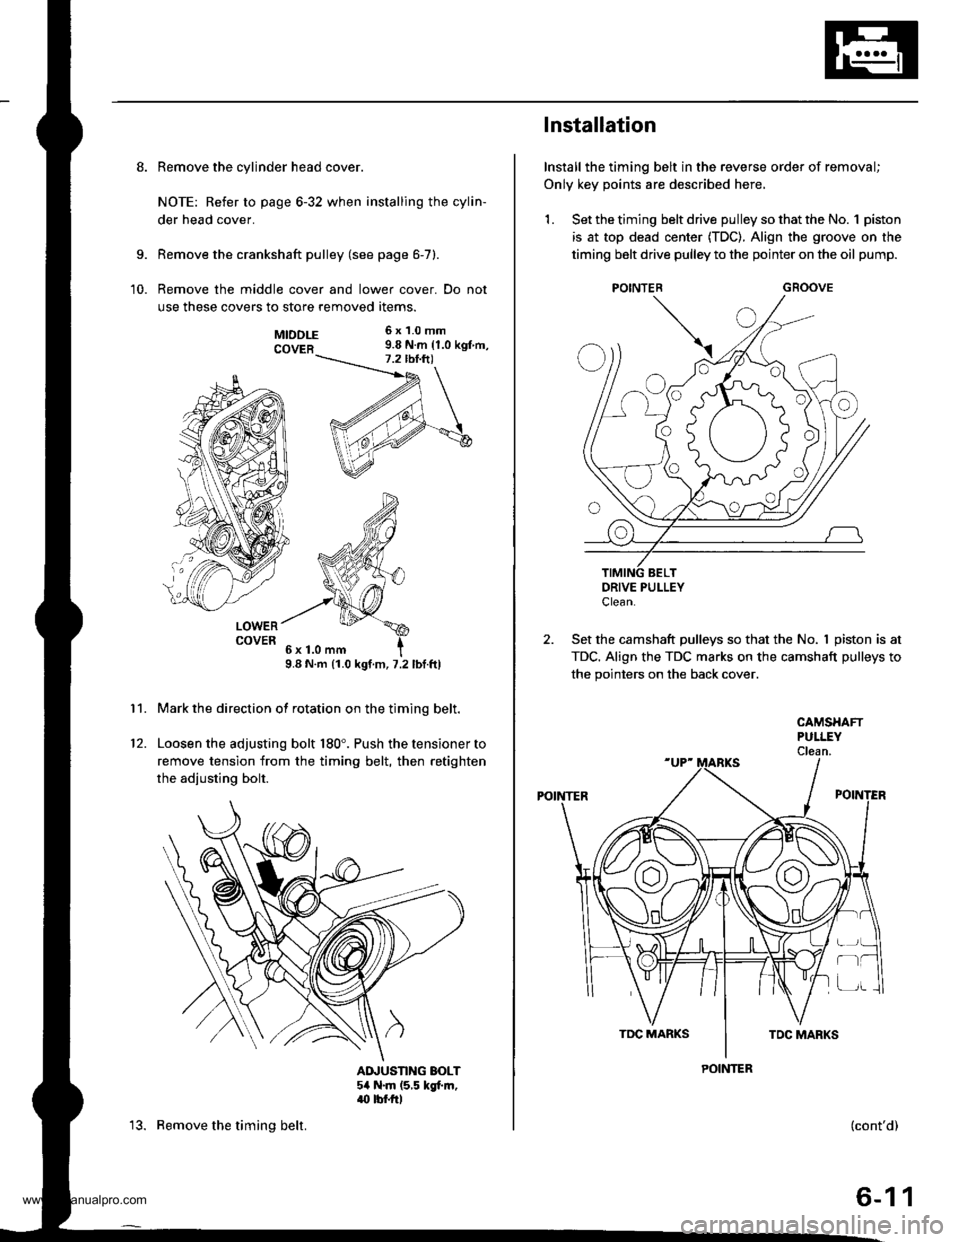 HONDA CR-V 1997 RD1-RD3 / 1.G Workshop Manual 
8. Remove the cylinder head cover.
NOTE: Refer to page 6-32 when installing the cylin-
der head cover.
Remove the crankshaft pulley (see page 6-7).
Remove the middle cover and lower cover. Do not
use